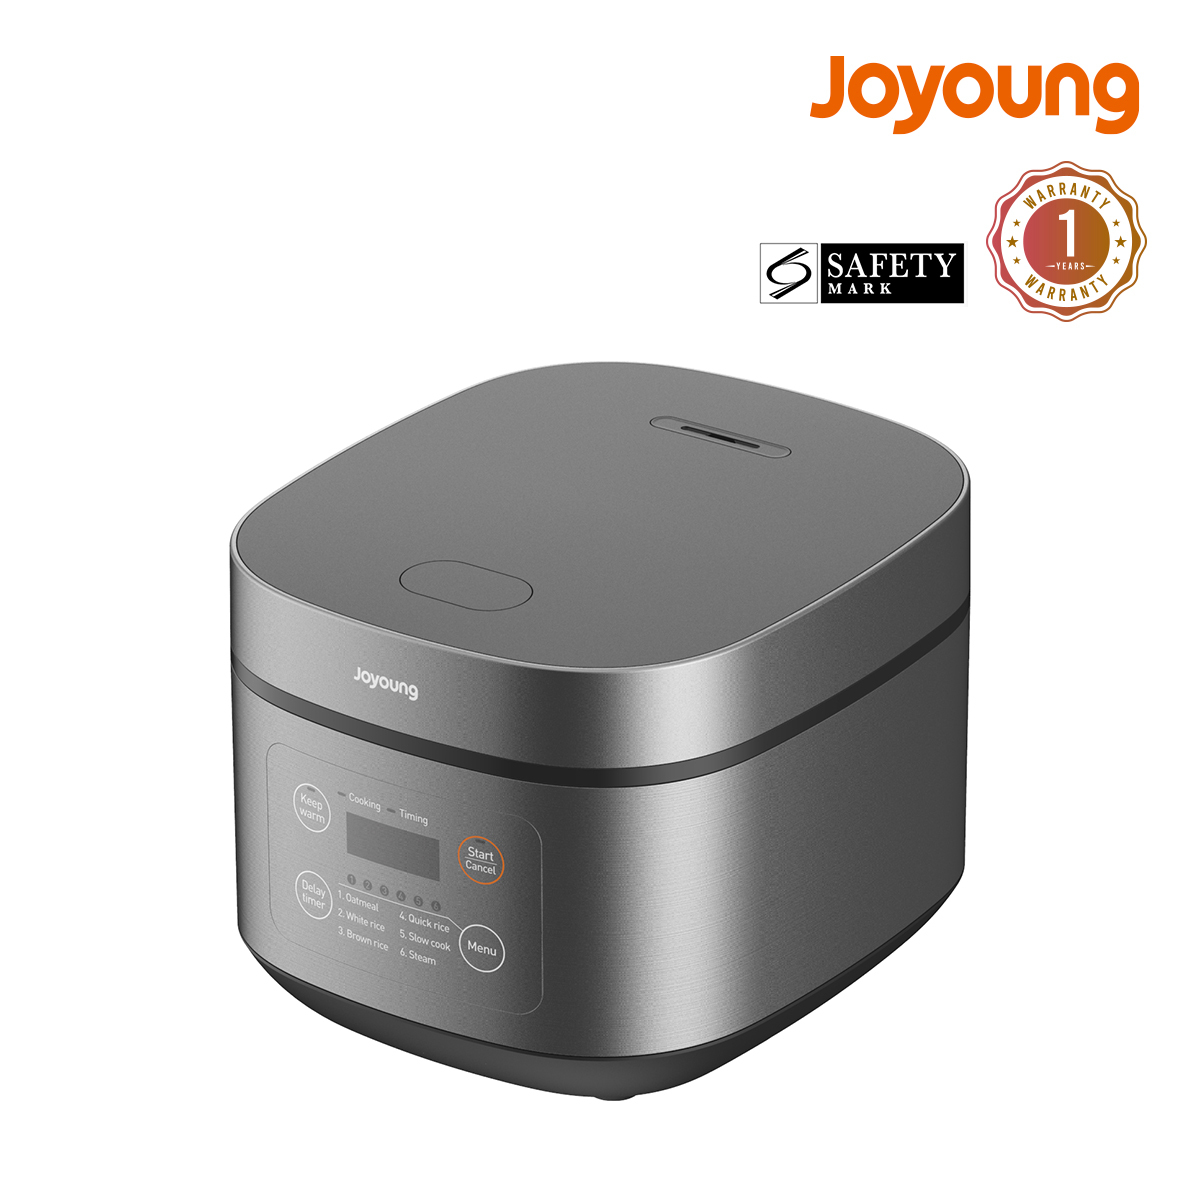 Joyoung 4L Digital Quick Cooking Rice Cooker / Safety Mark / 1 Year Warranty